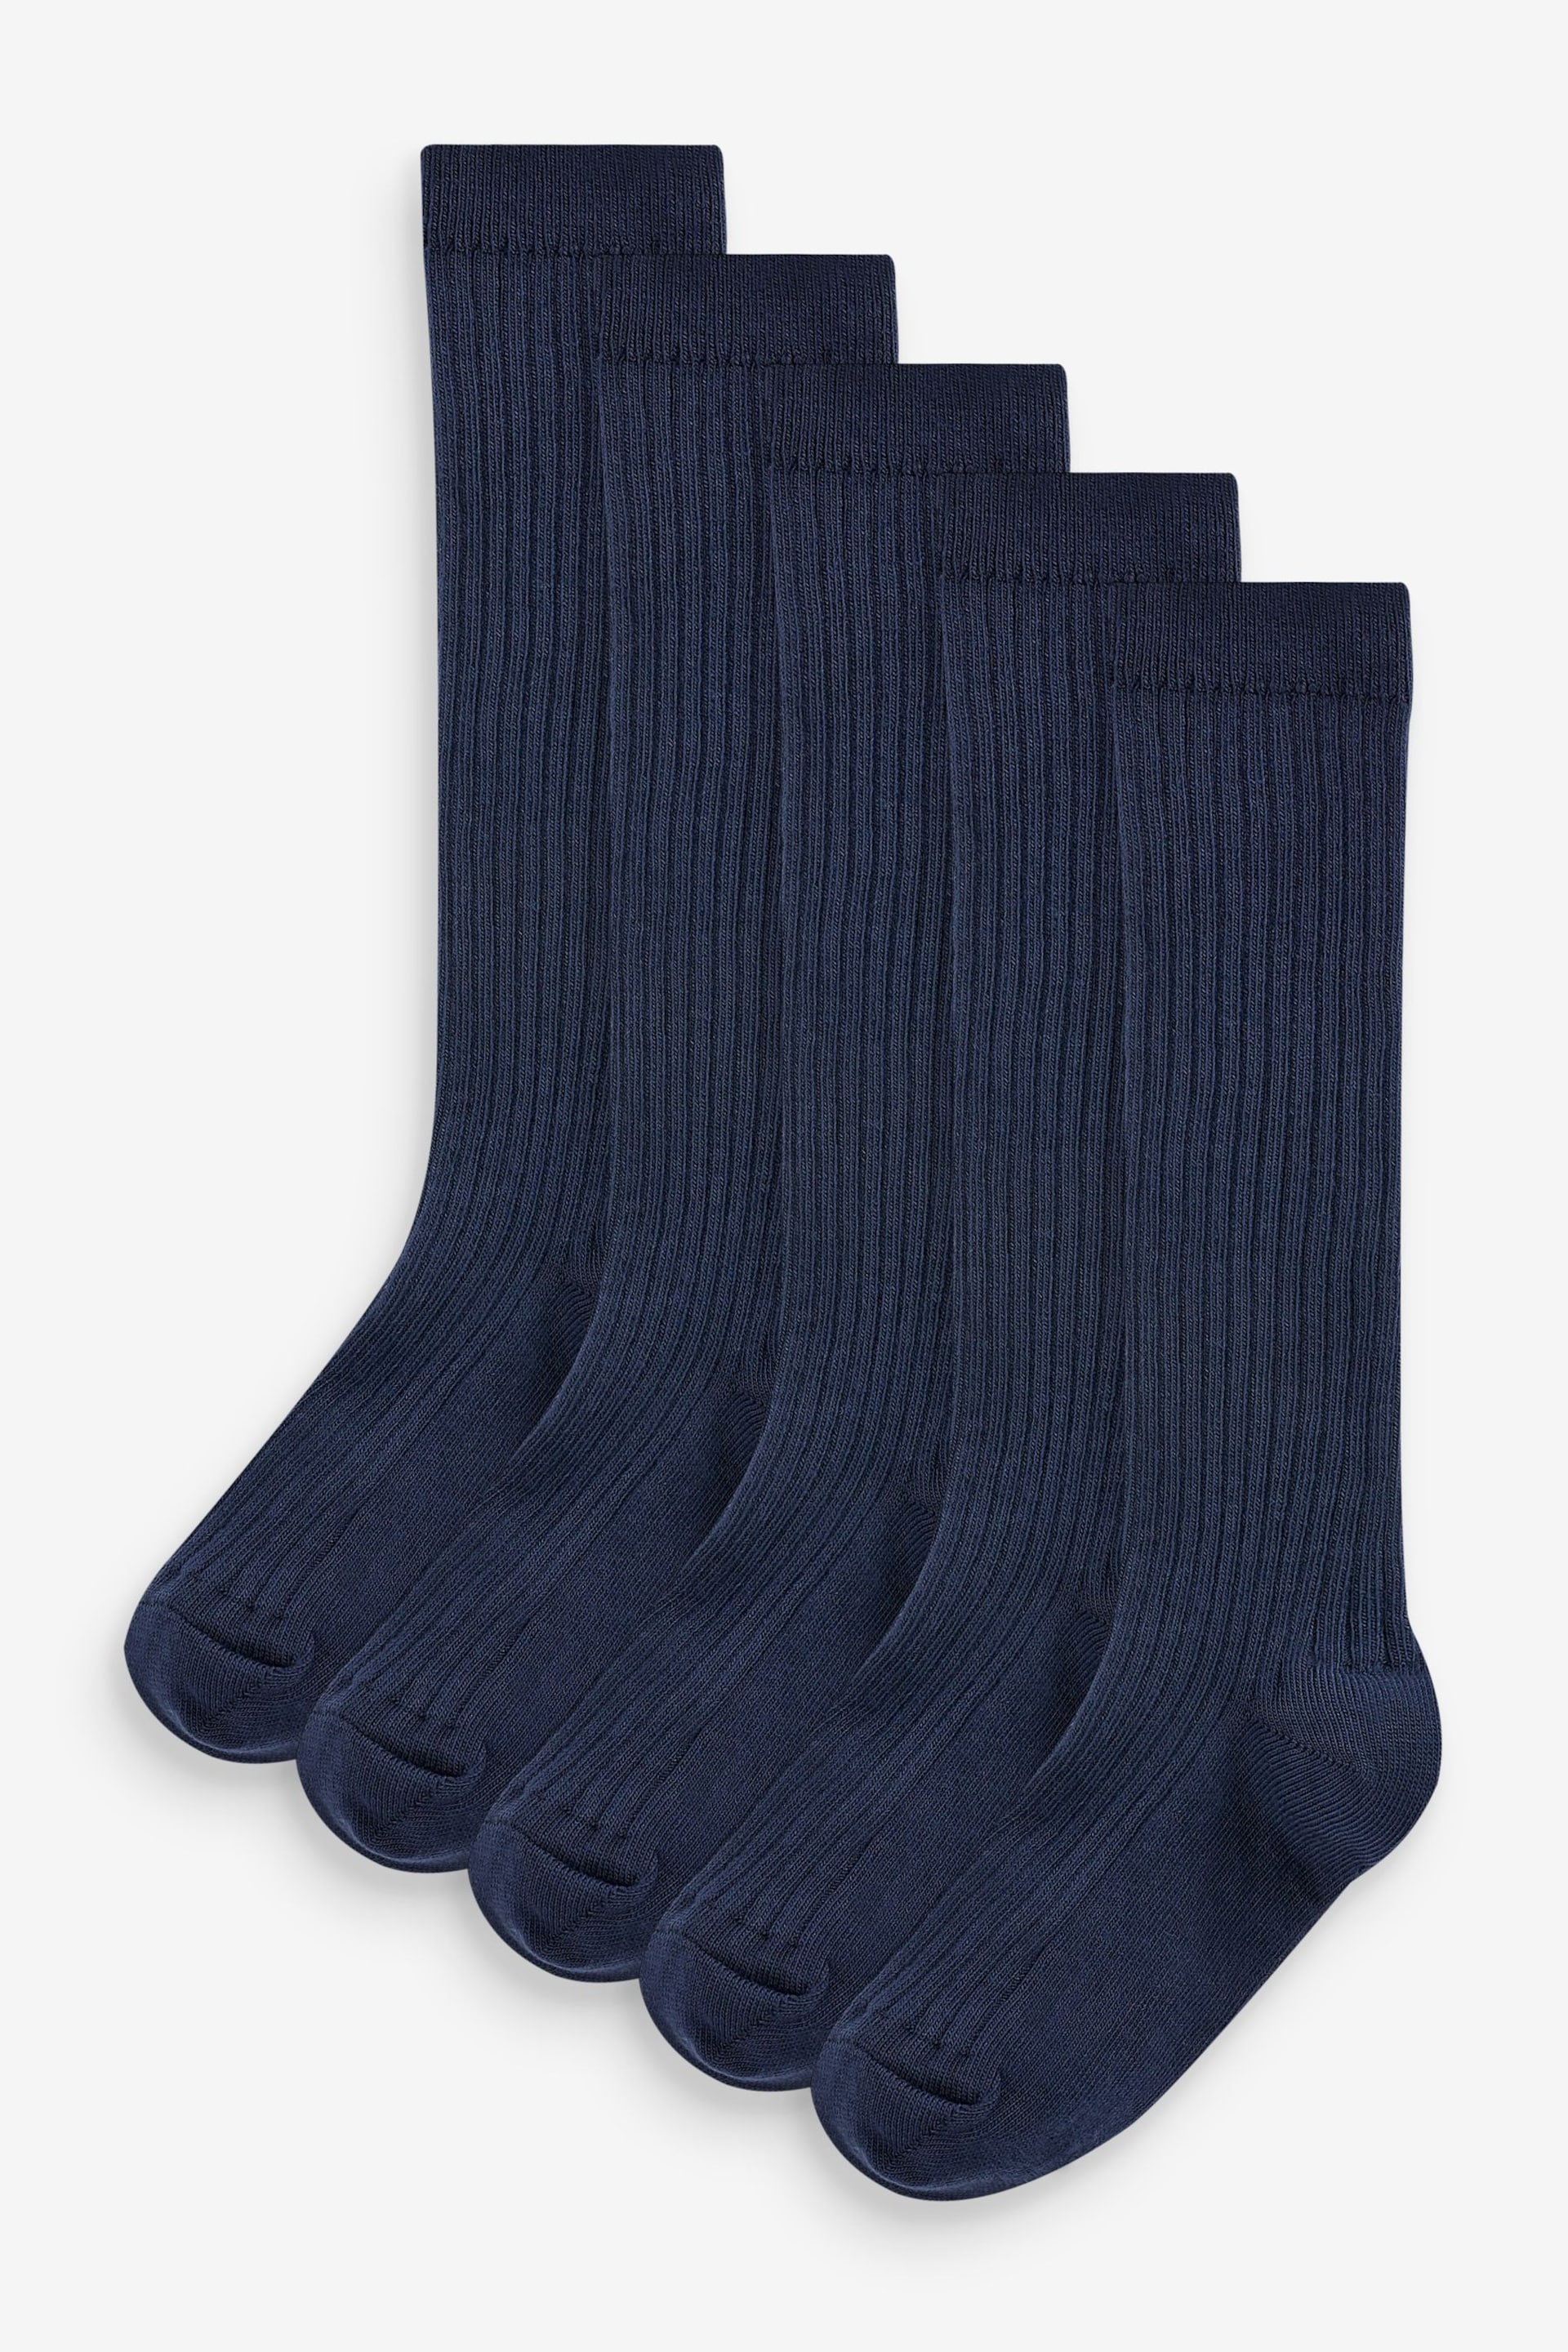 Navy 5 Pack Cotton Rich Knee High Socks - Image 1 of 2